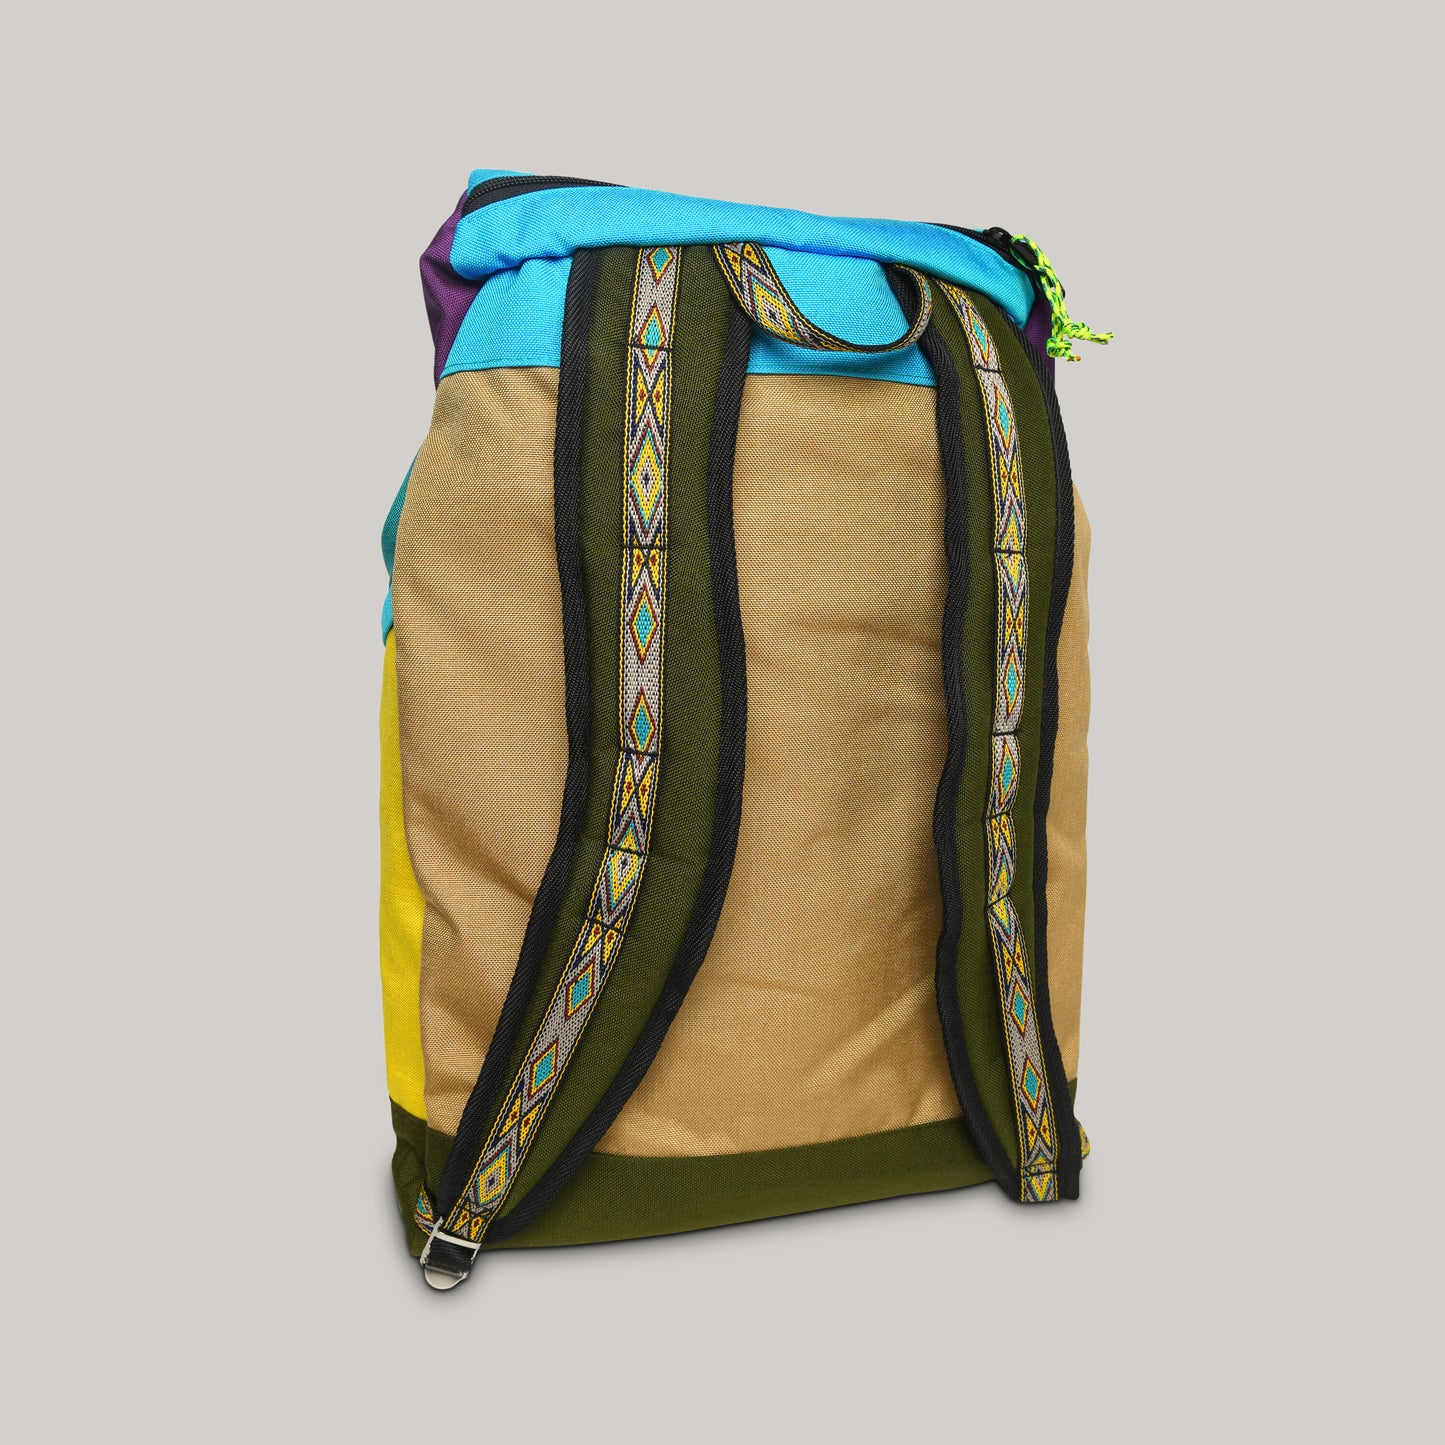 EPPERSON MOUNTANEERING LARGE CLIMB PACK - TURQUOISE/SANDSTONE